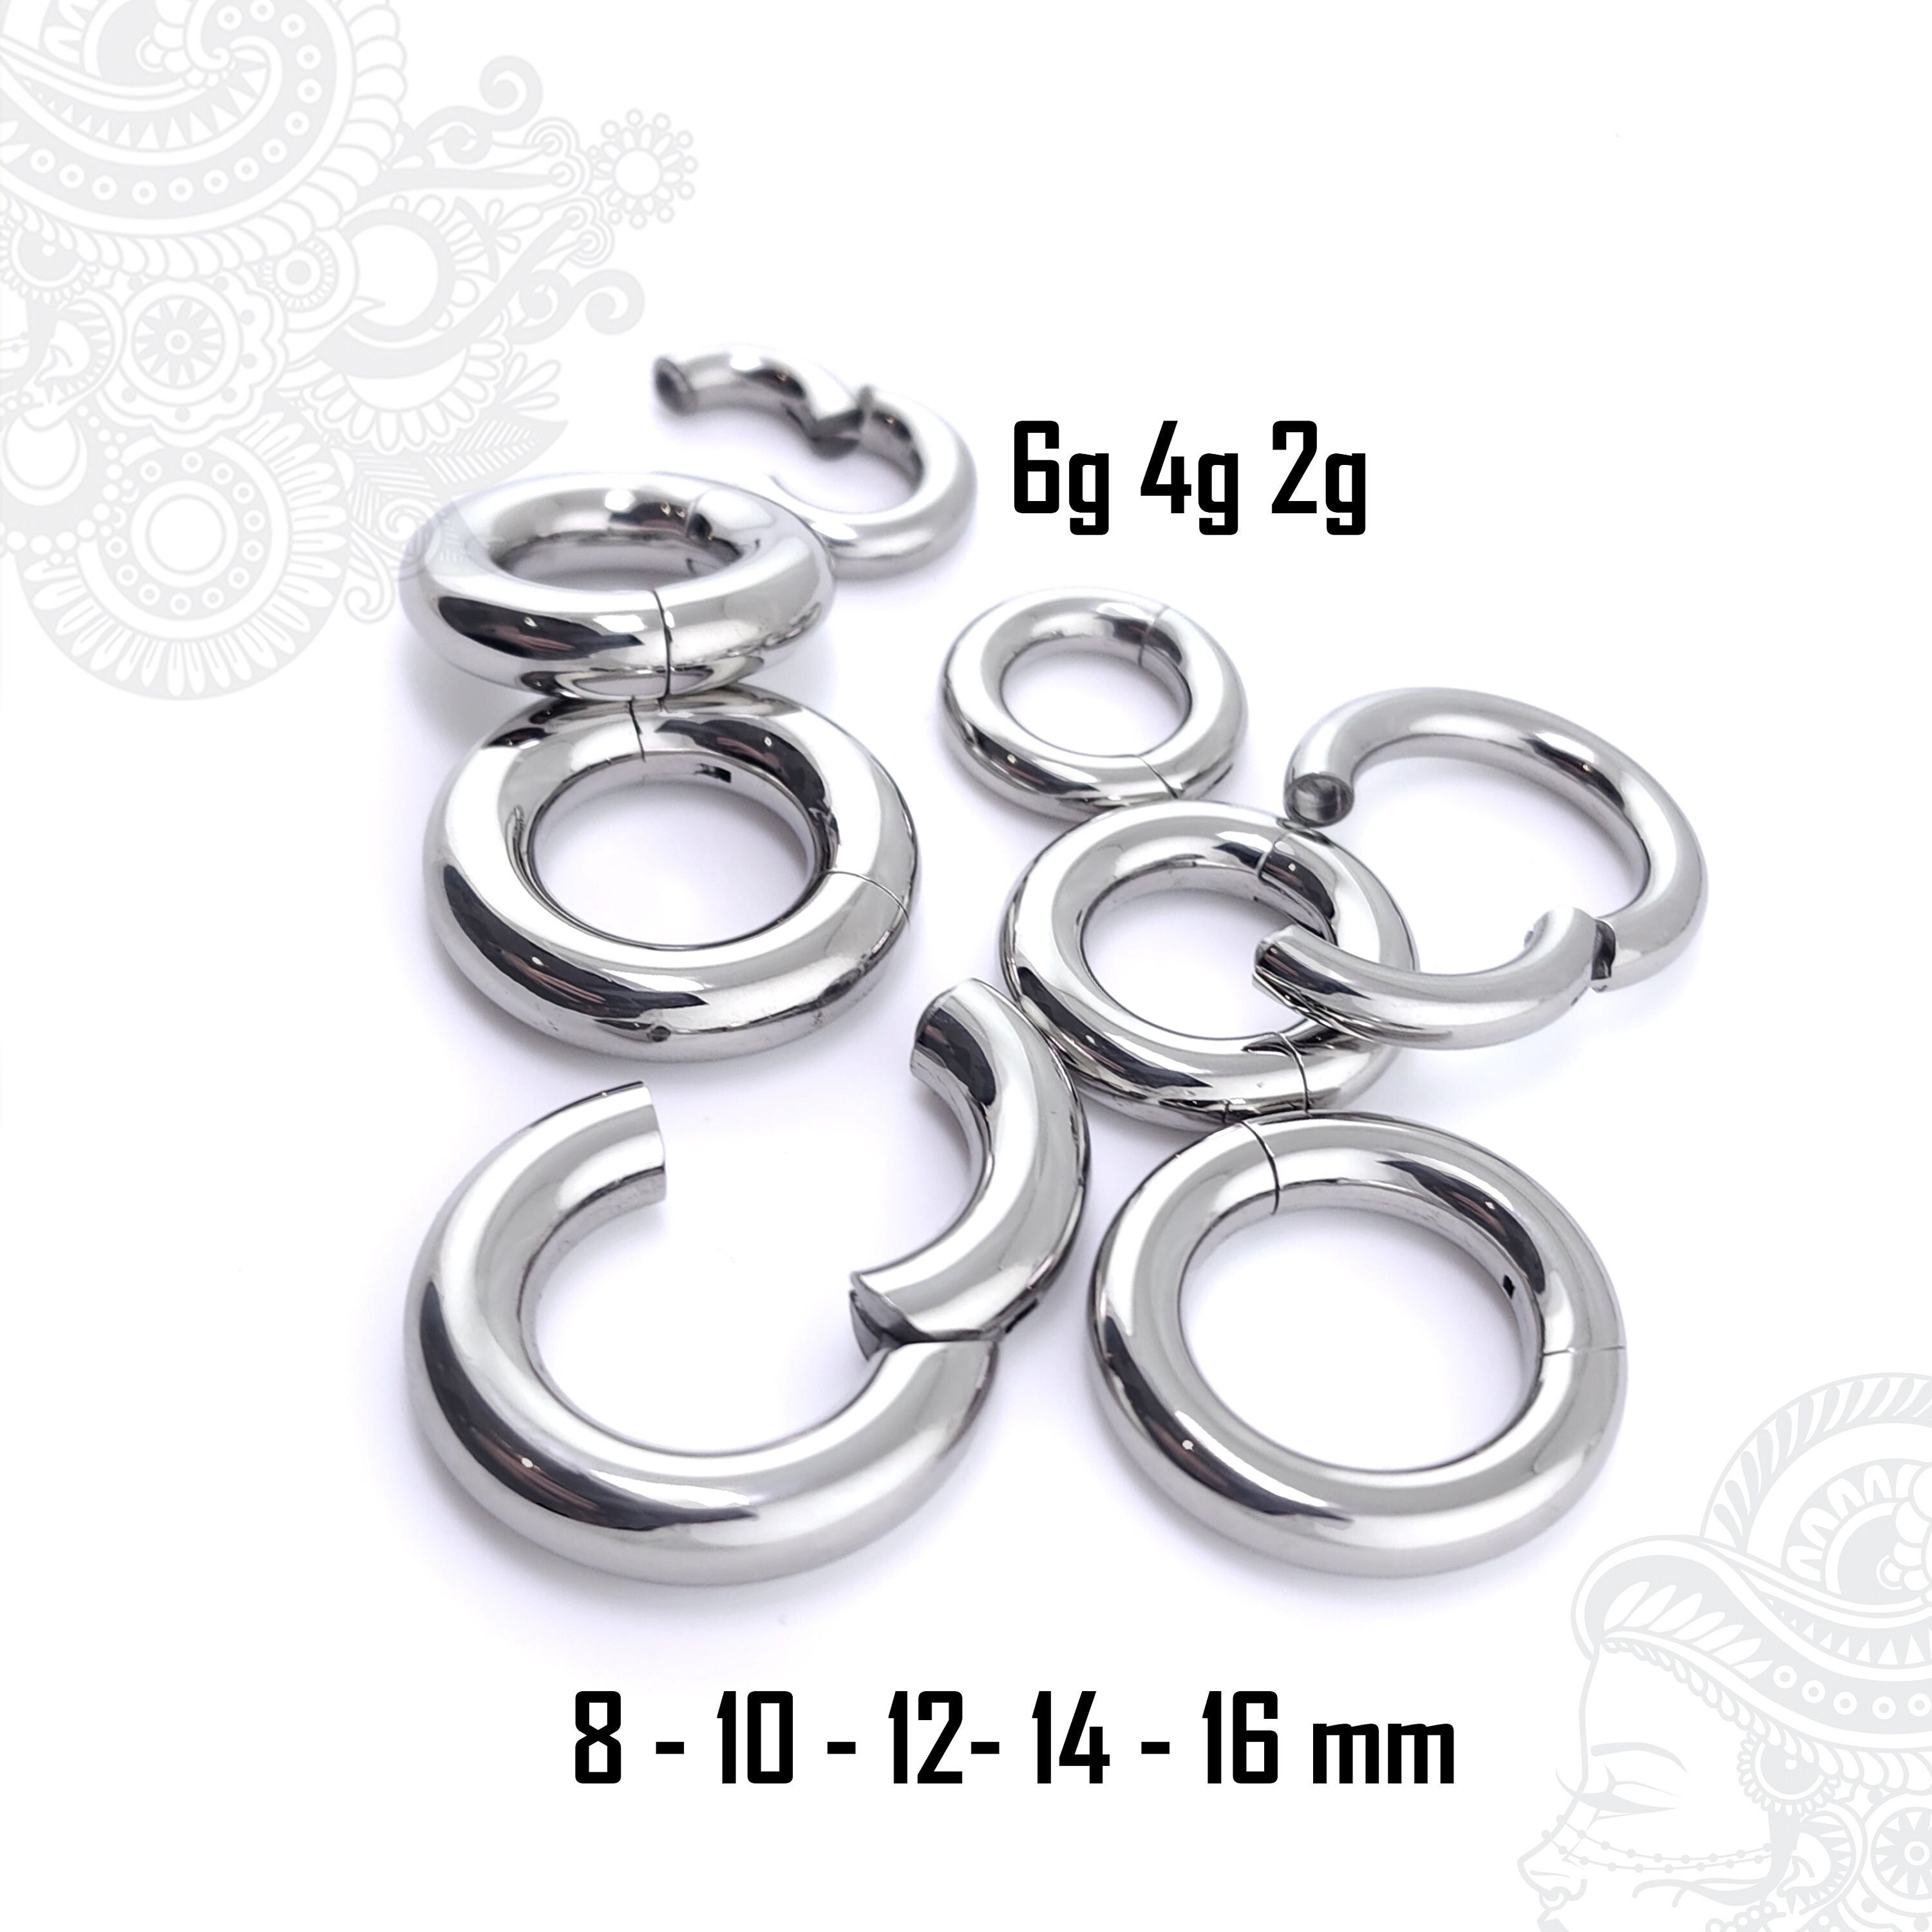 Ring Size Adjuster 12 Pack Super Soft for Loose Rings Jewelry Guard, Ring  Fitter, Sizer 2 Styles 4 Sizes Free Shipping With Tracking. 